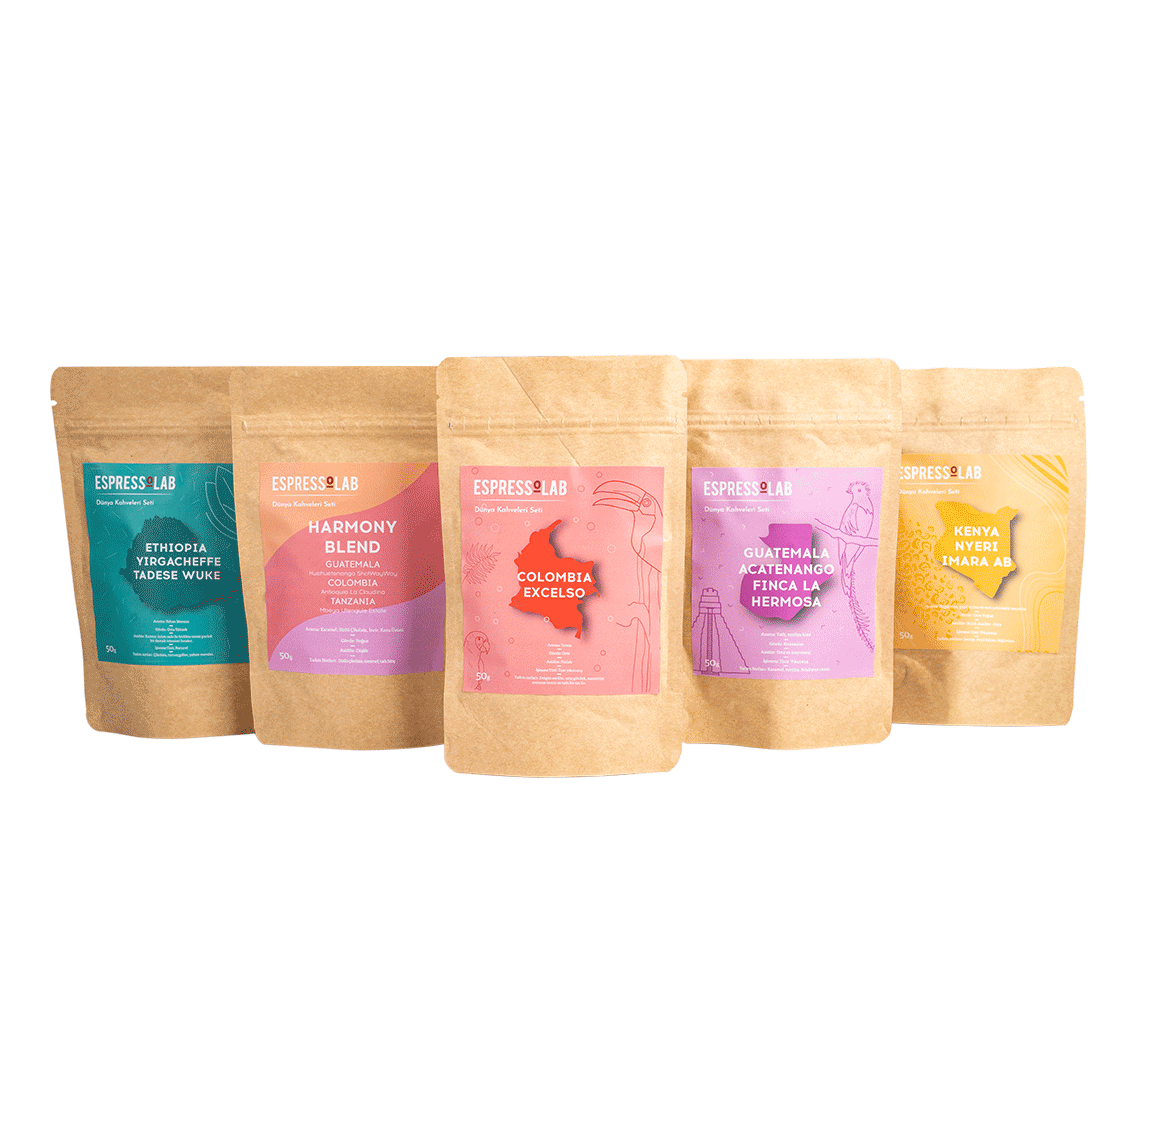 World Coffees Set - 5 Packages (250 gr)